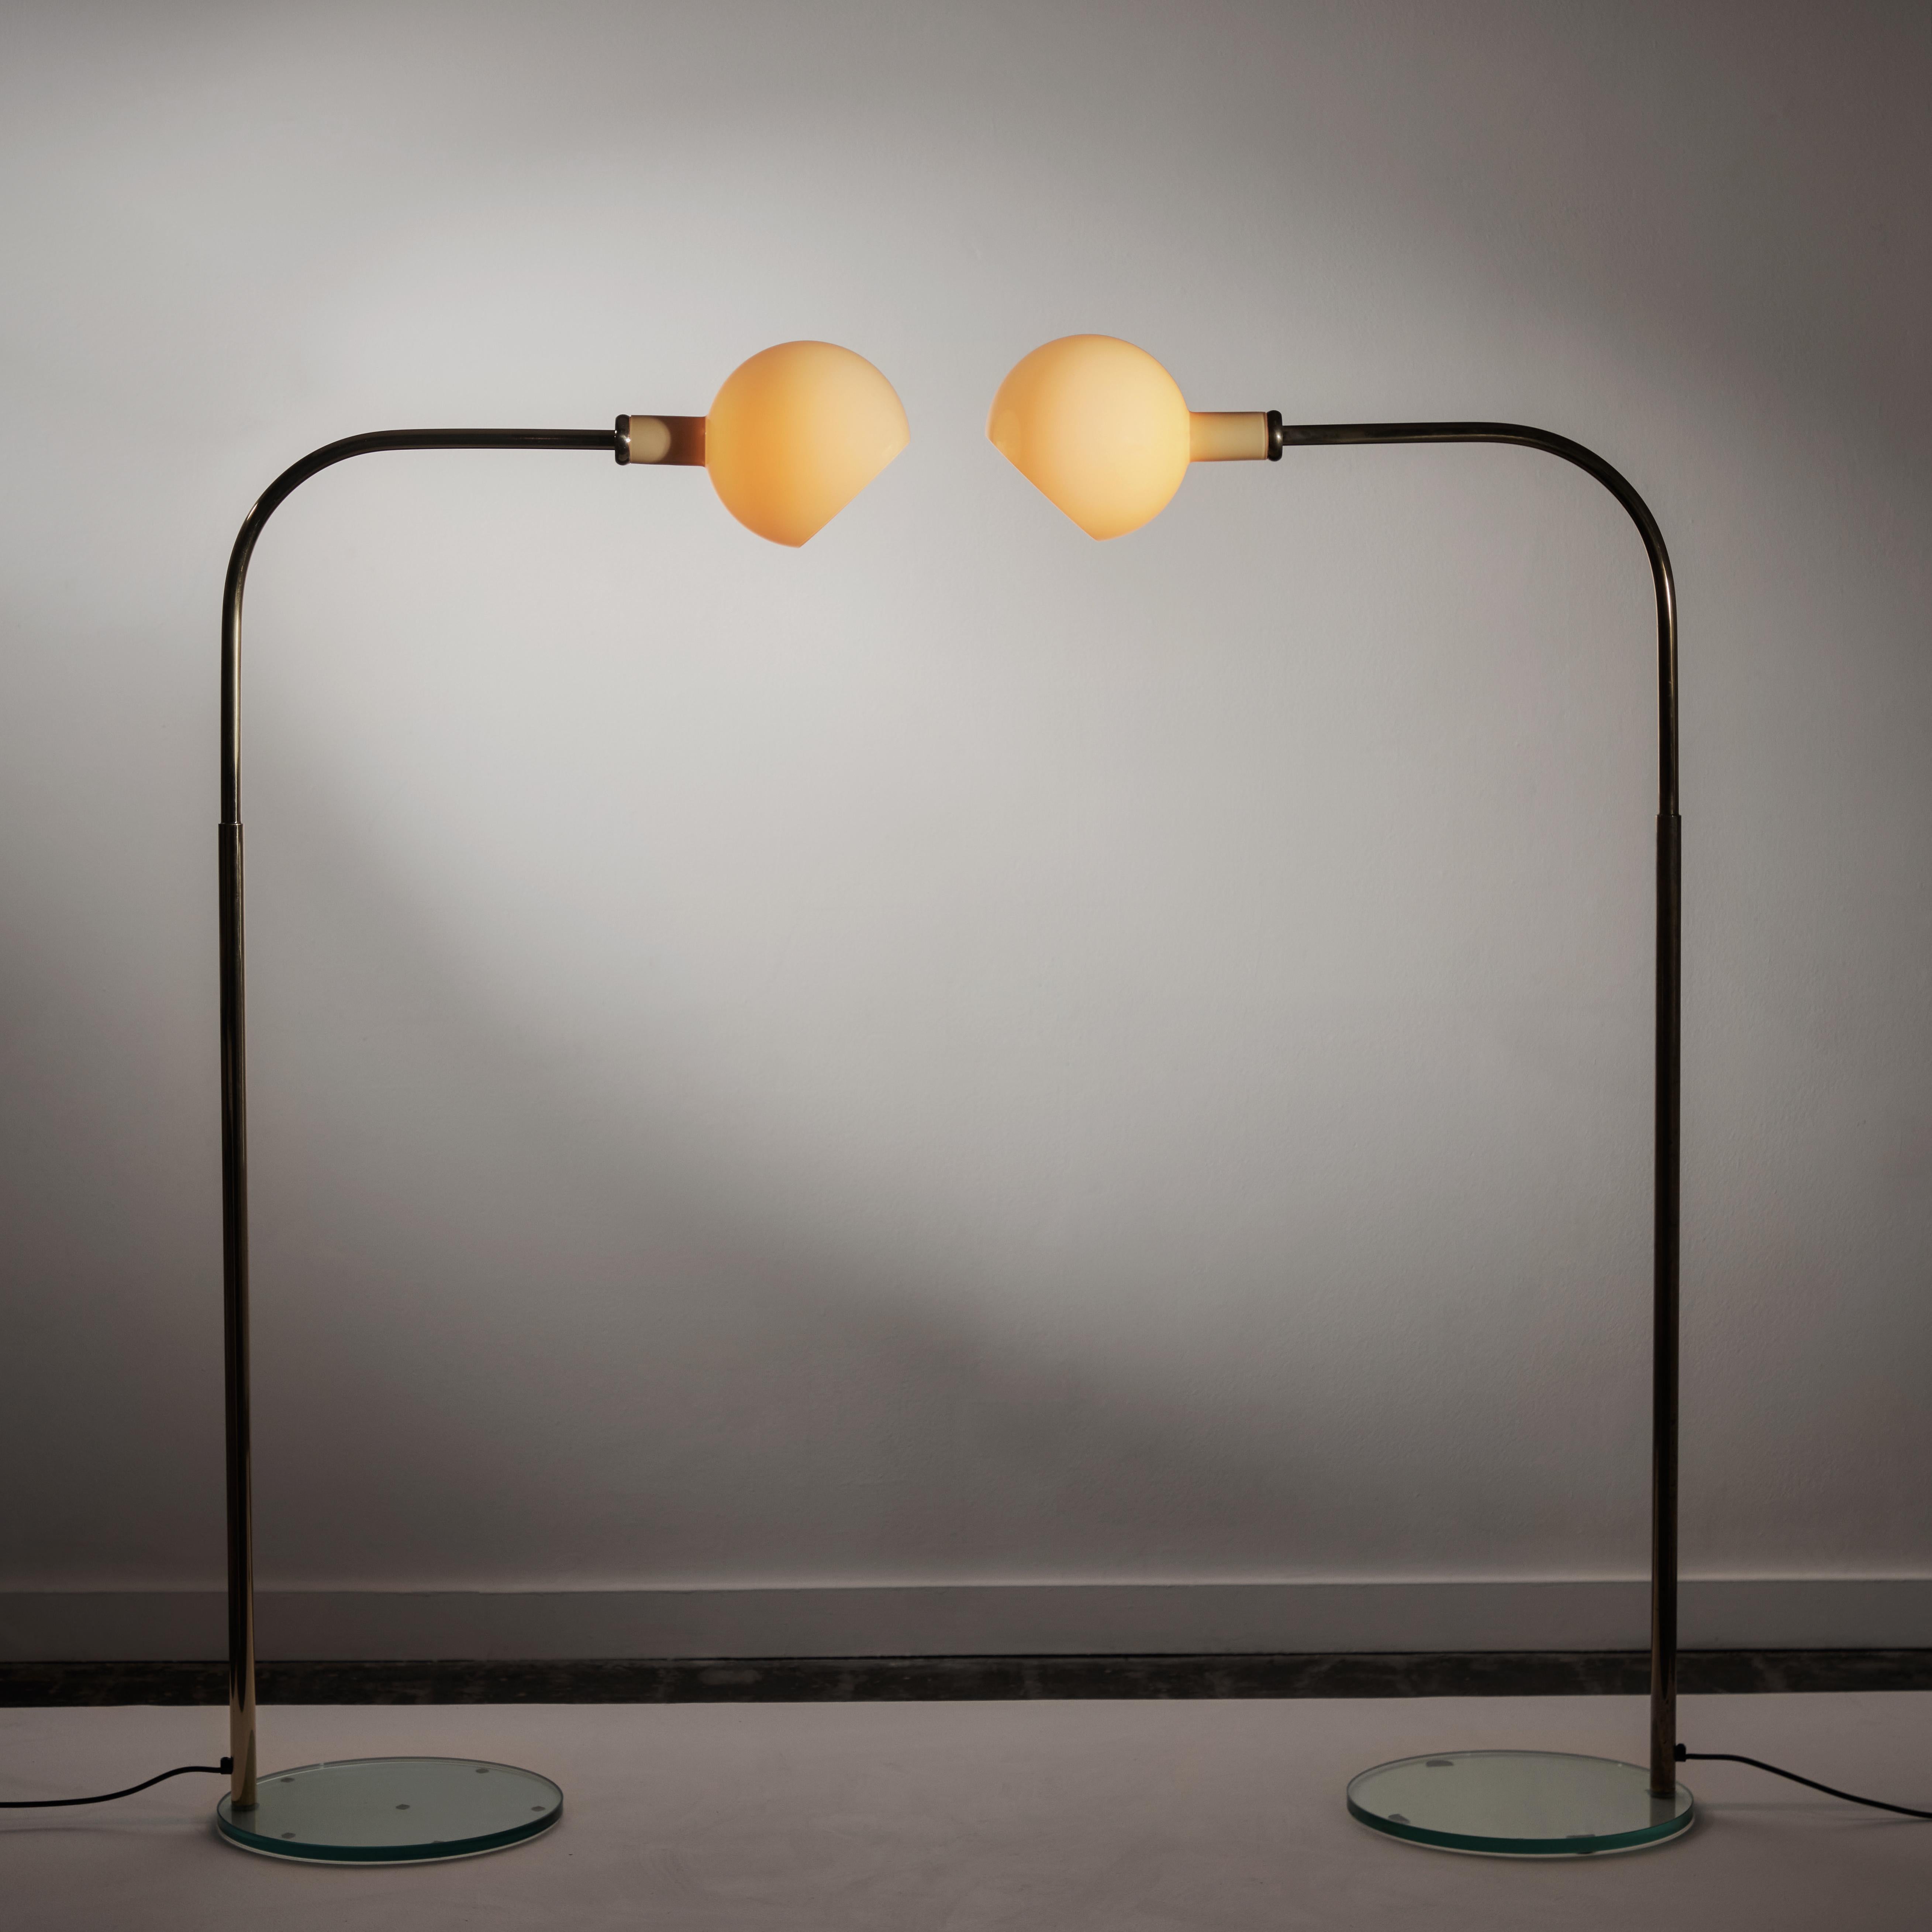 Pair of Parola floor lamps by Gae Aulenti and Piero Castiglioni. Designed and manufactured in Italy, circa 1980's. Glass, brass. Original EU cord. We recommend on E14 bulb per fixture. Bulbs not included. SOLD AS A PAIR ONLY!.